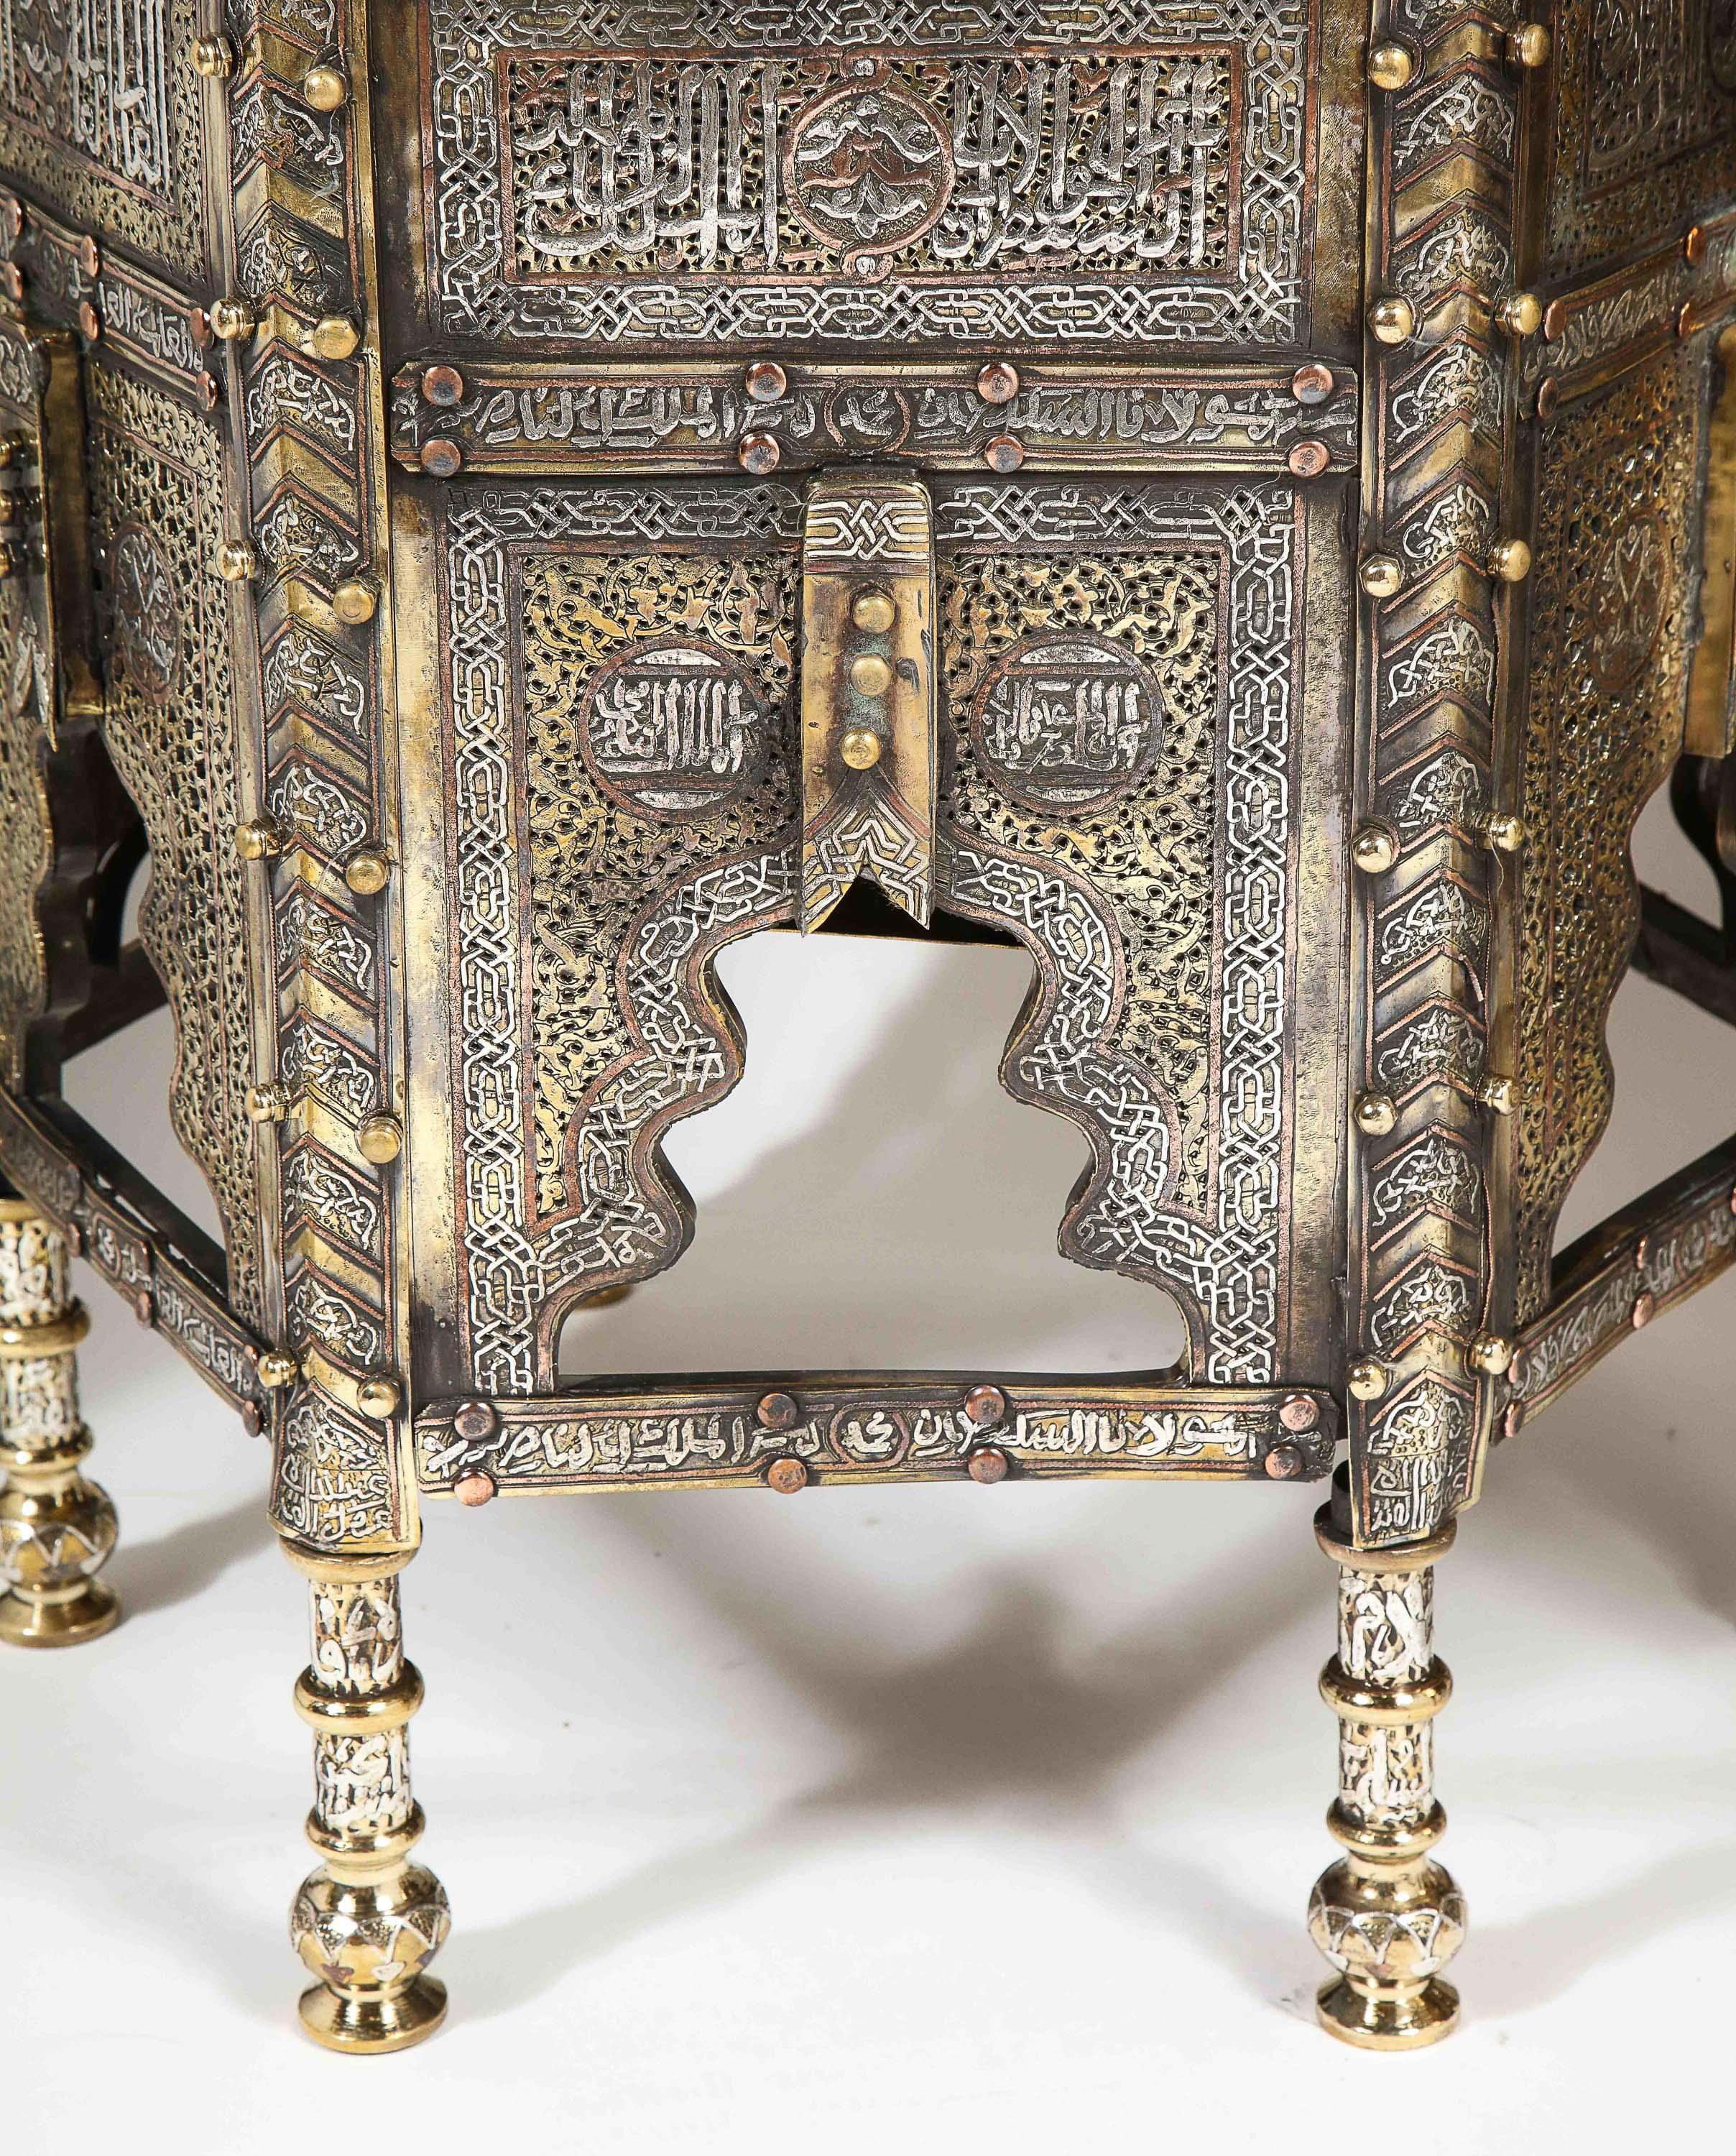 Exceptional Pair of Islamic Mamluk Revival Silver Inlaid Quran Side Tables For Sale 2